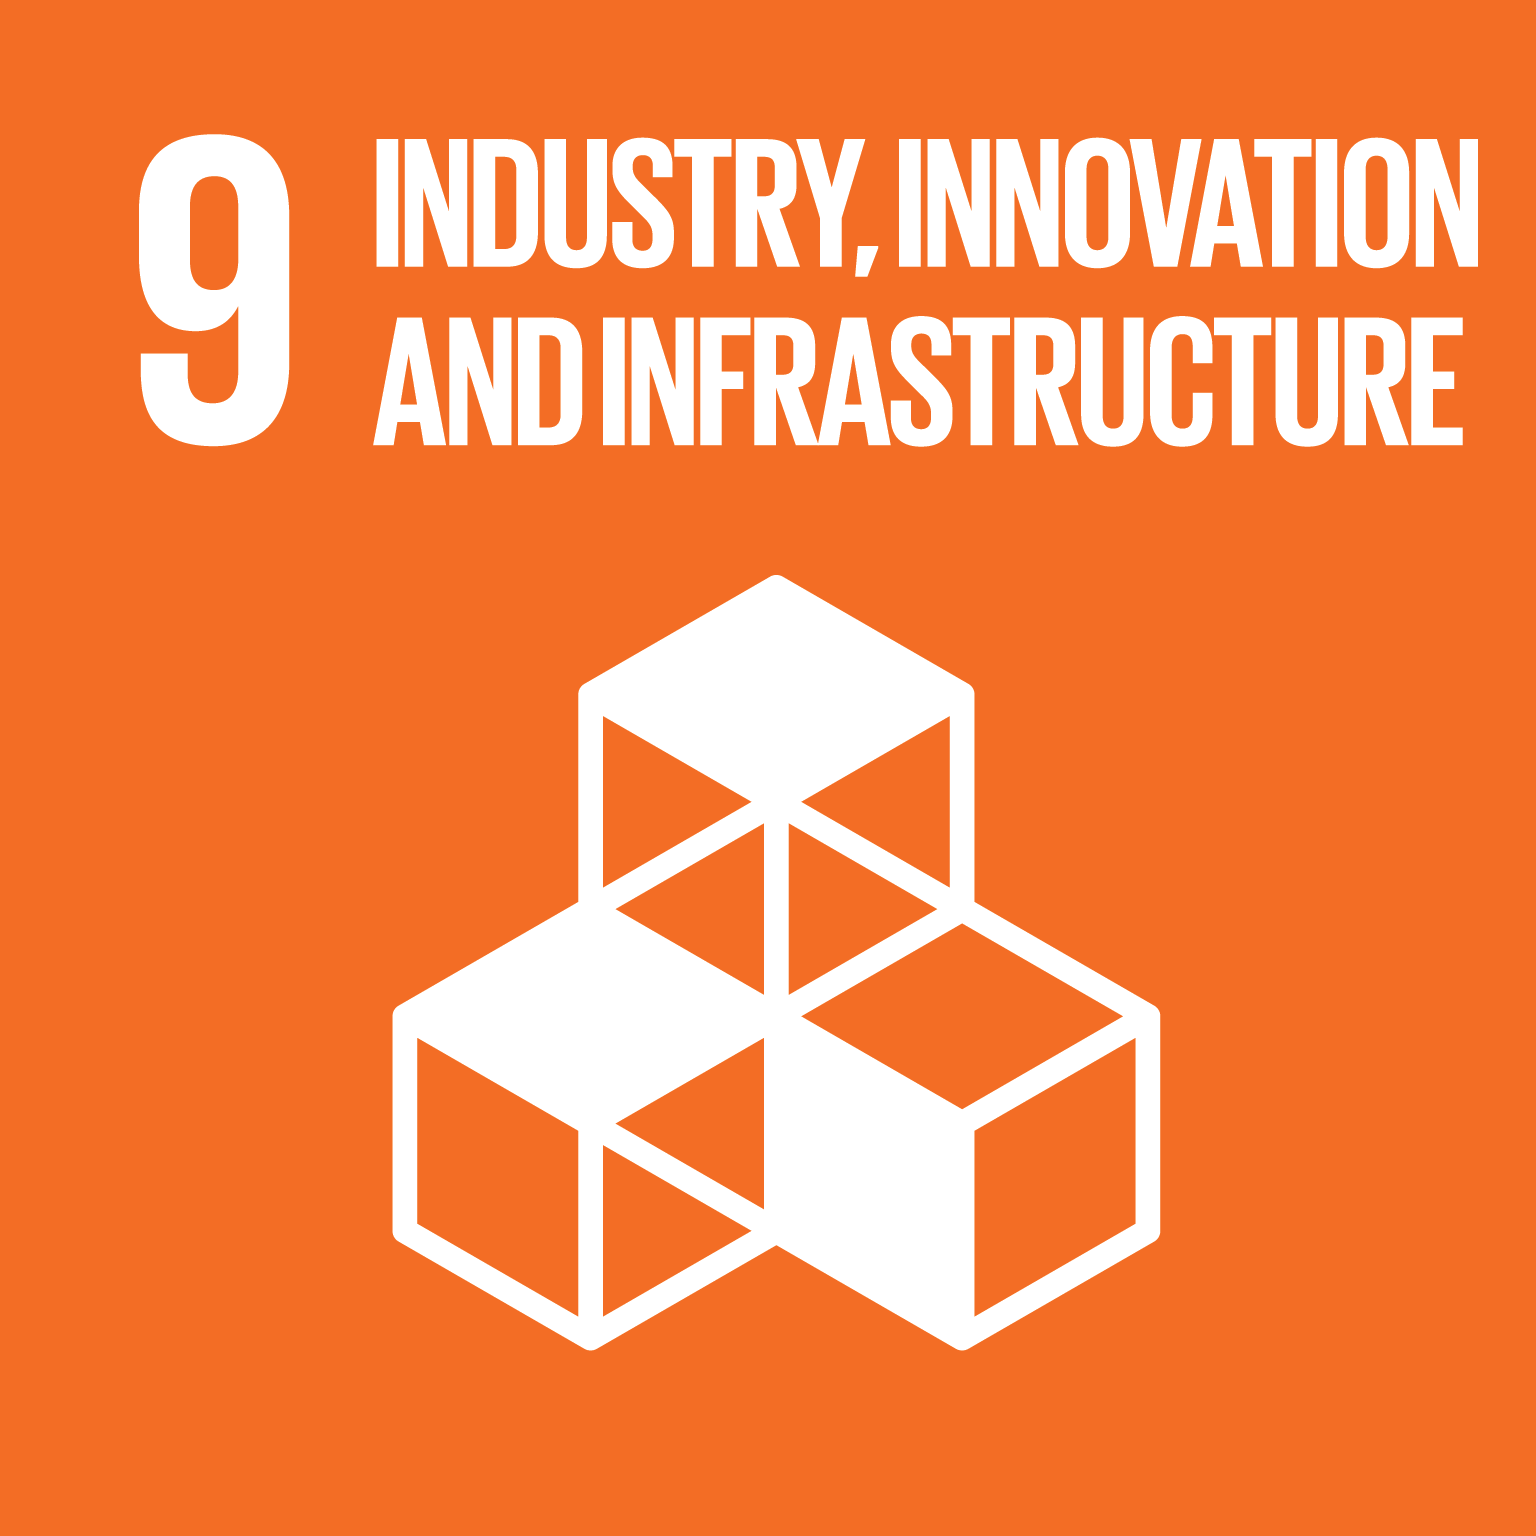 9. Industry, innovation, and infraestructure 